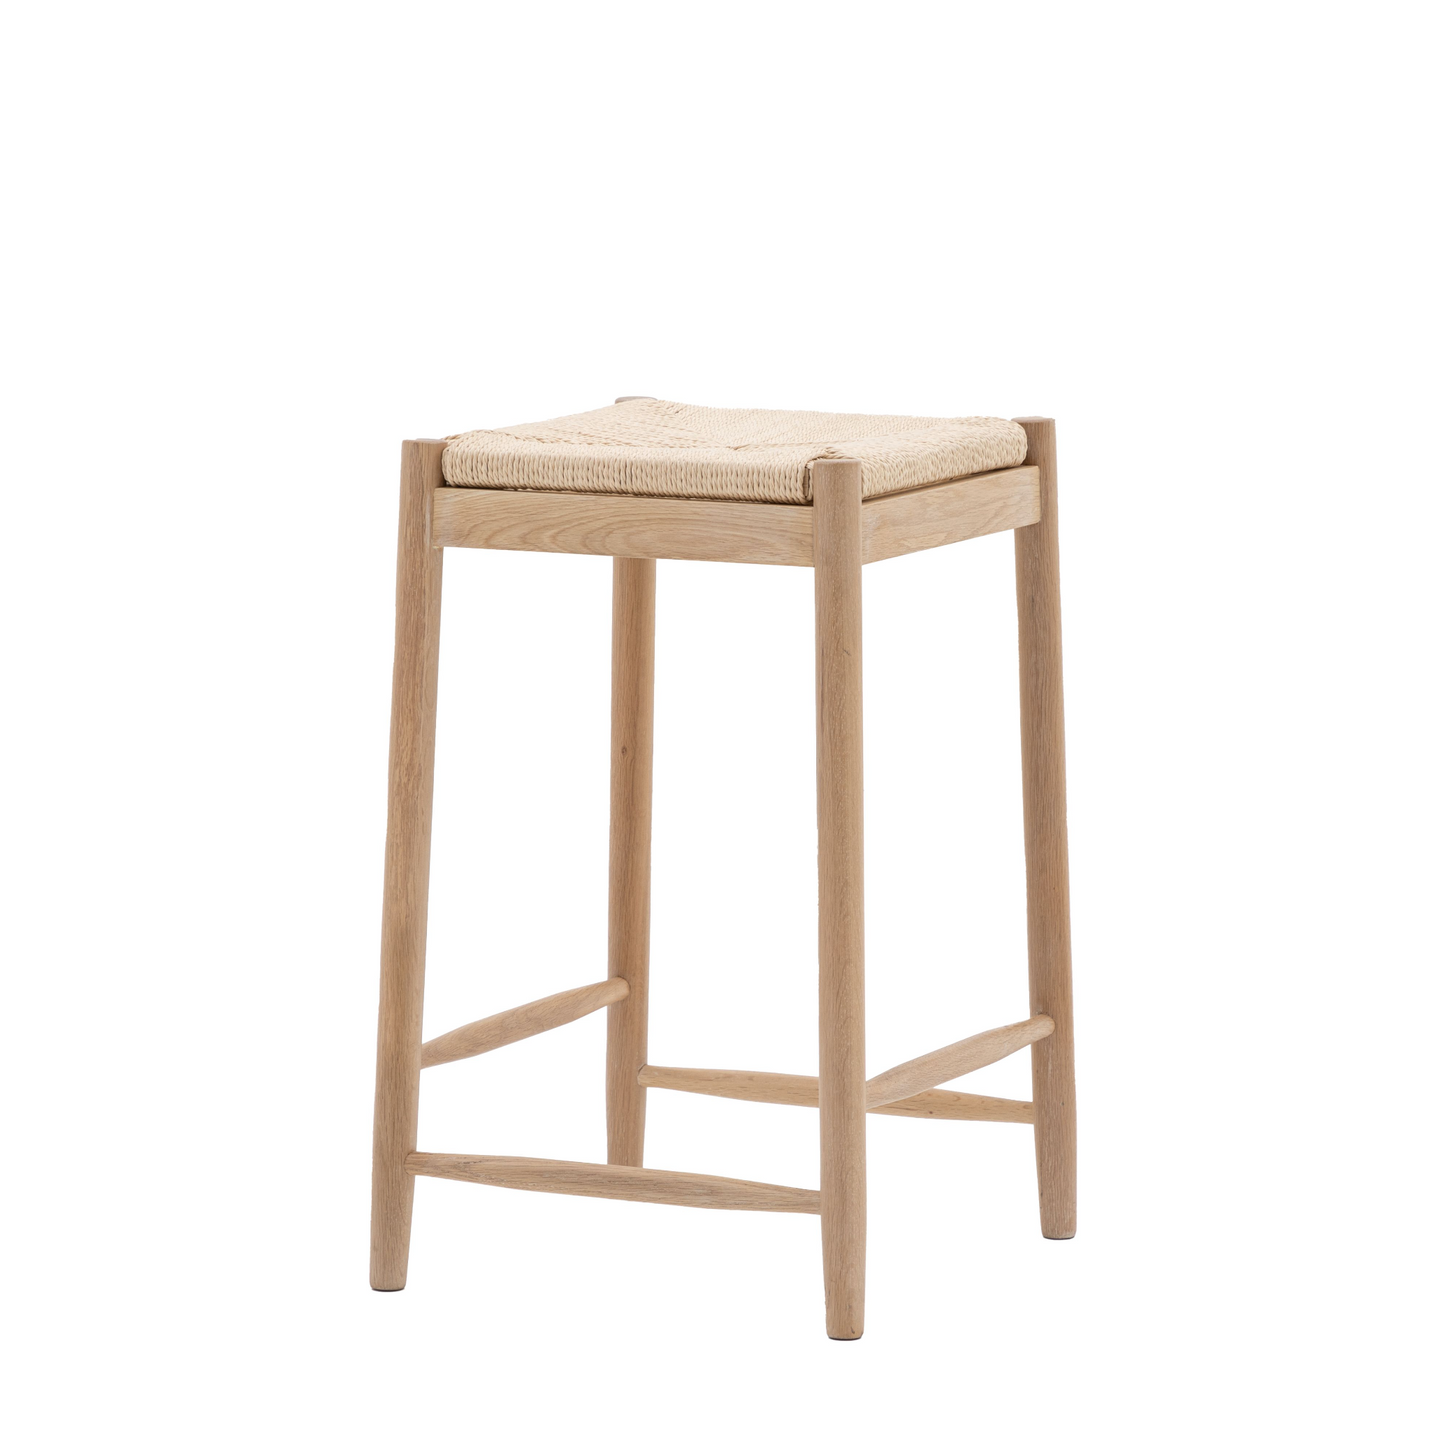 A Buckland Oak Stool with a woven seat for interior decor.